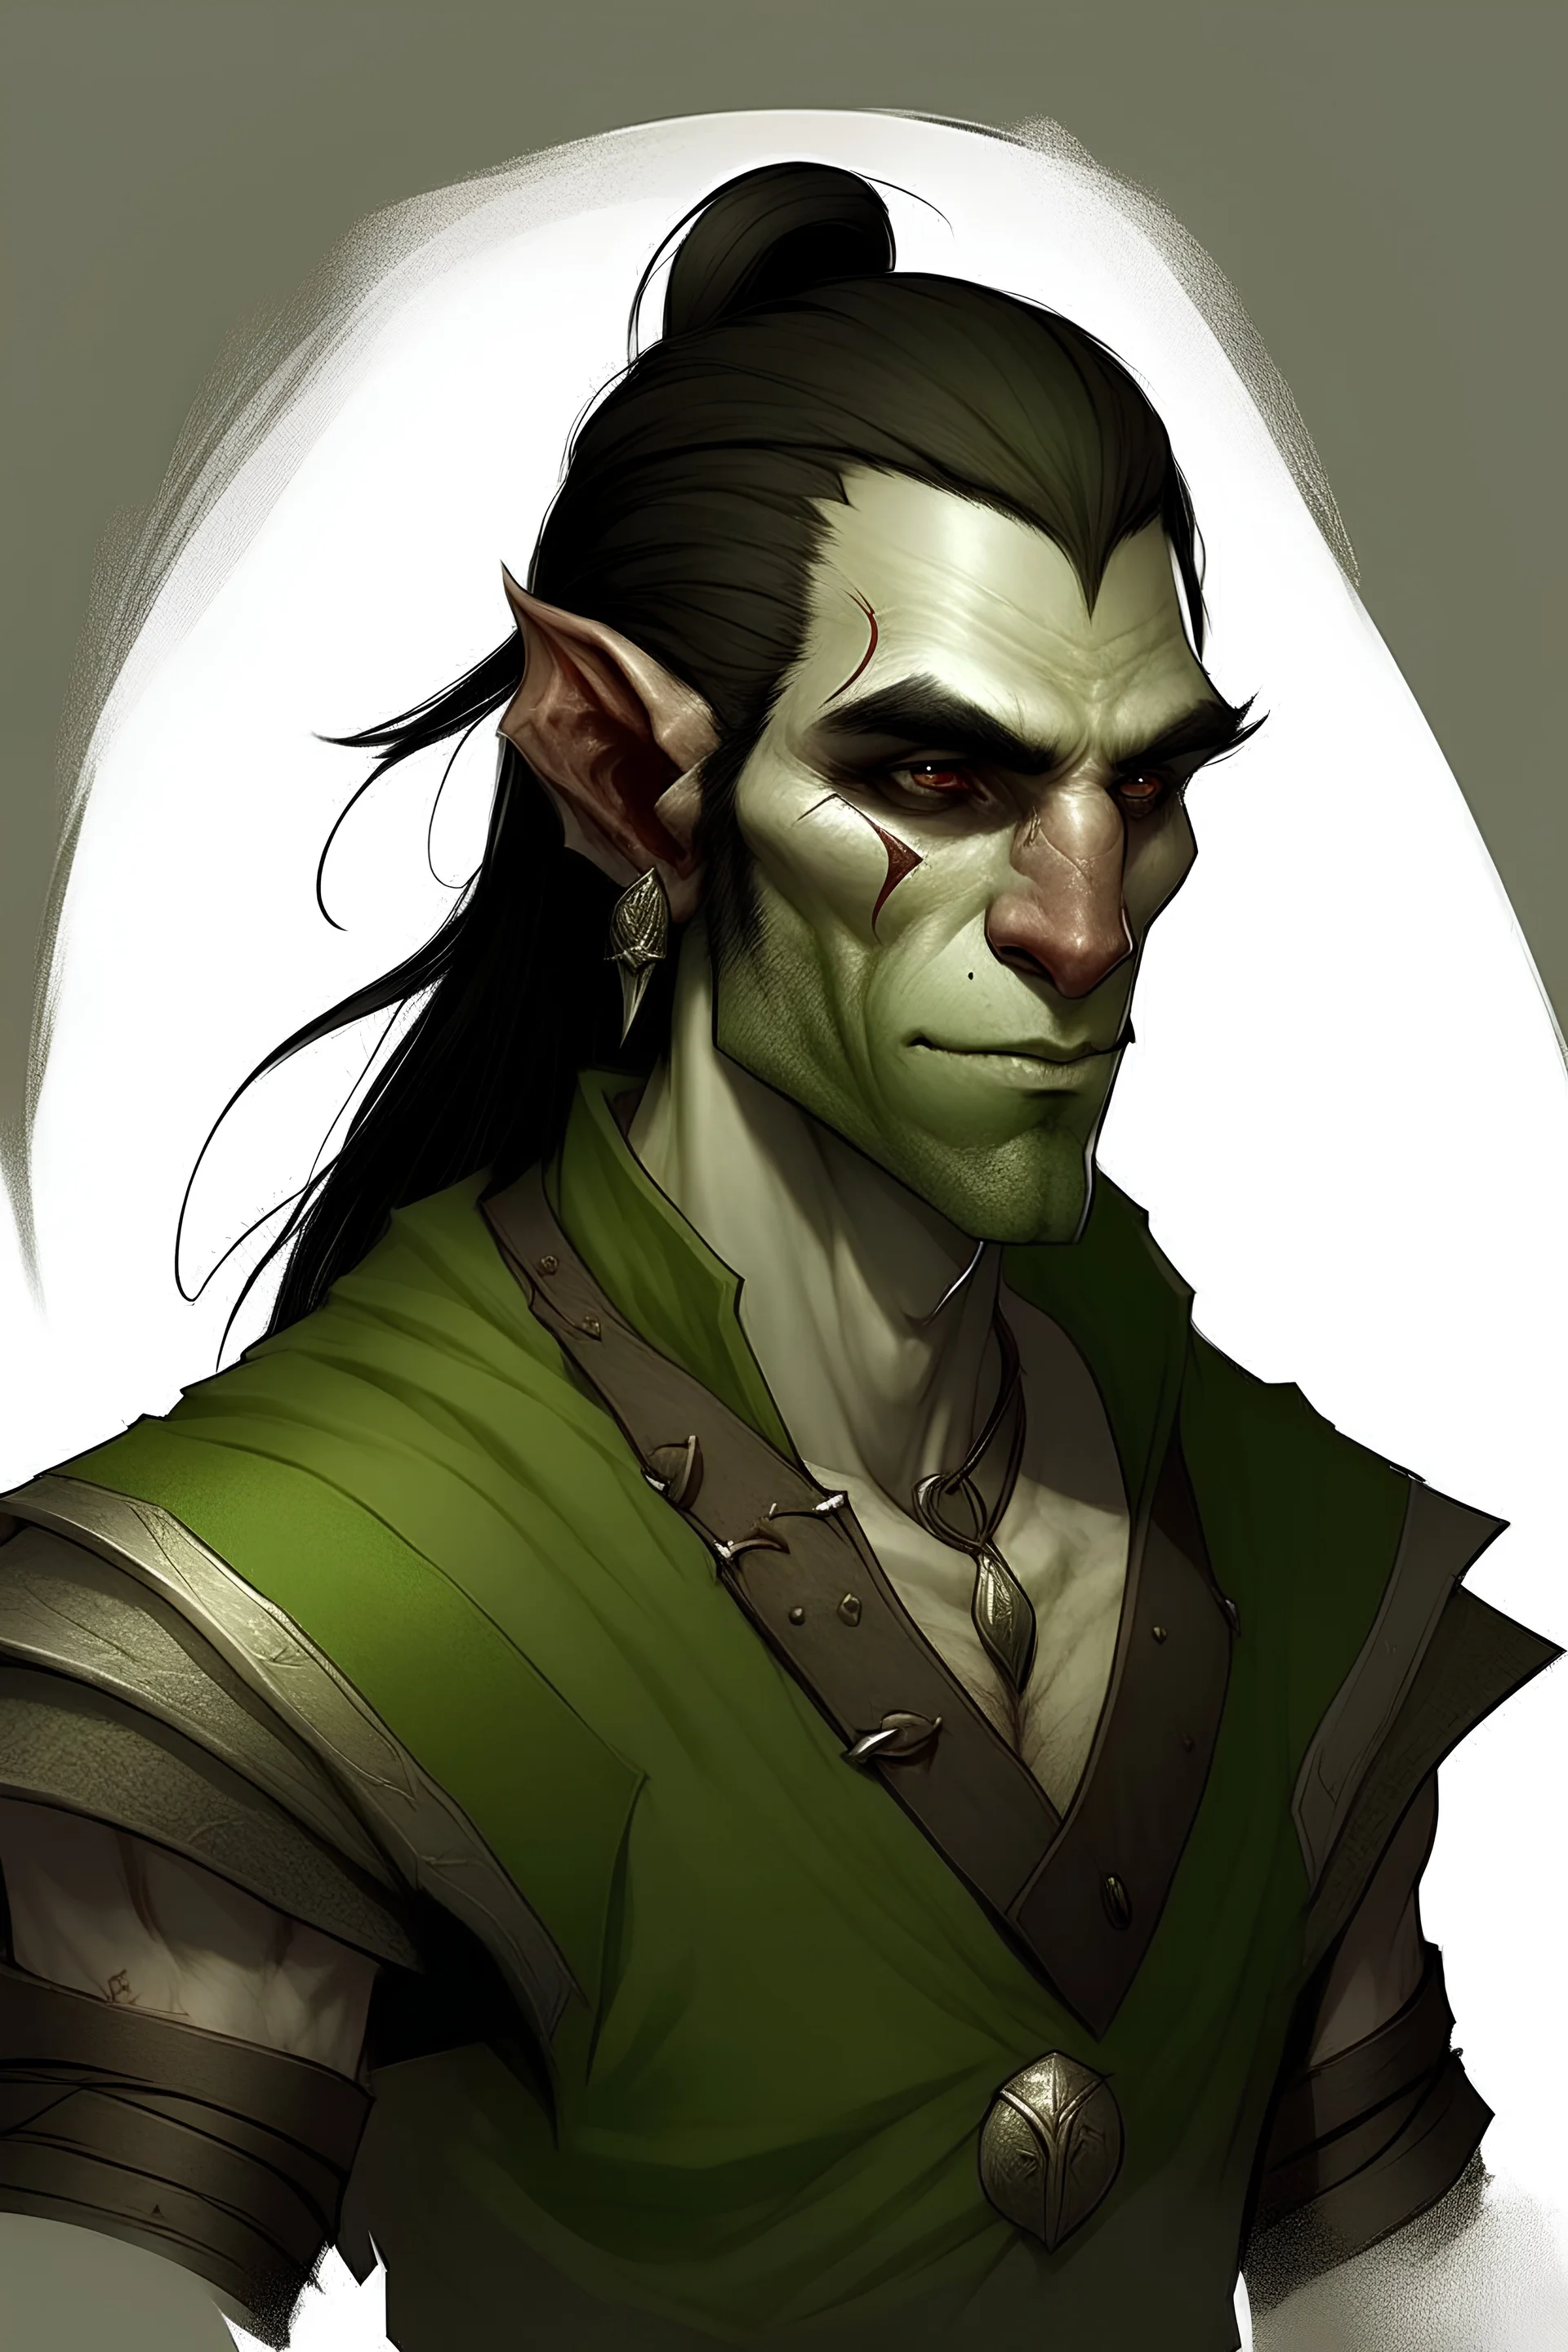 Half elf half orc. He dont have left arm. Scar on the nose